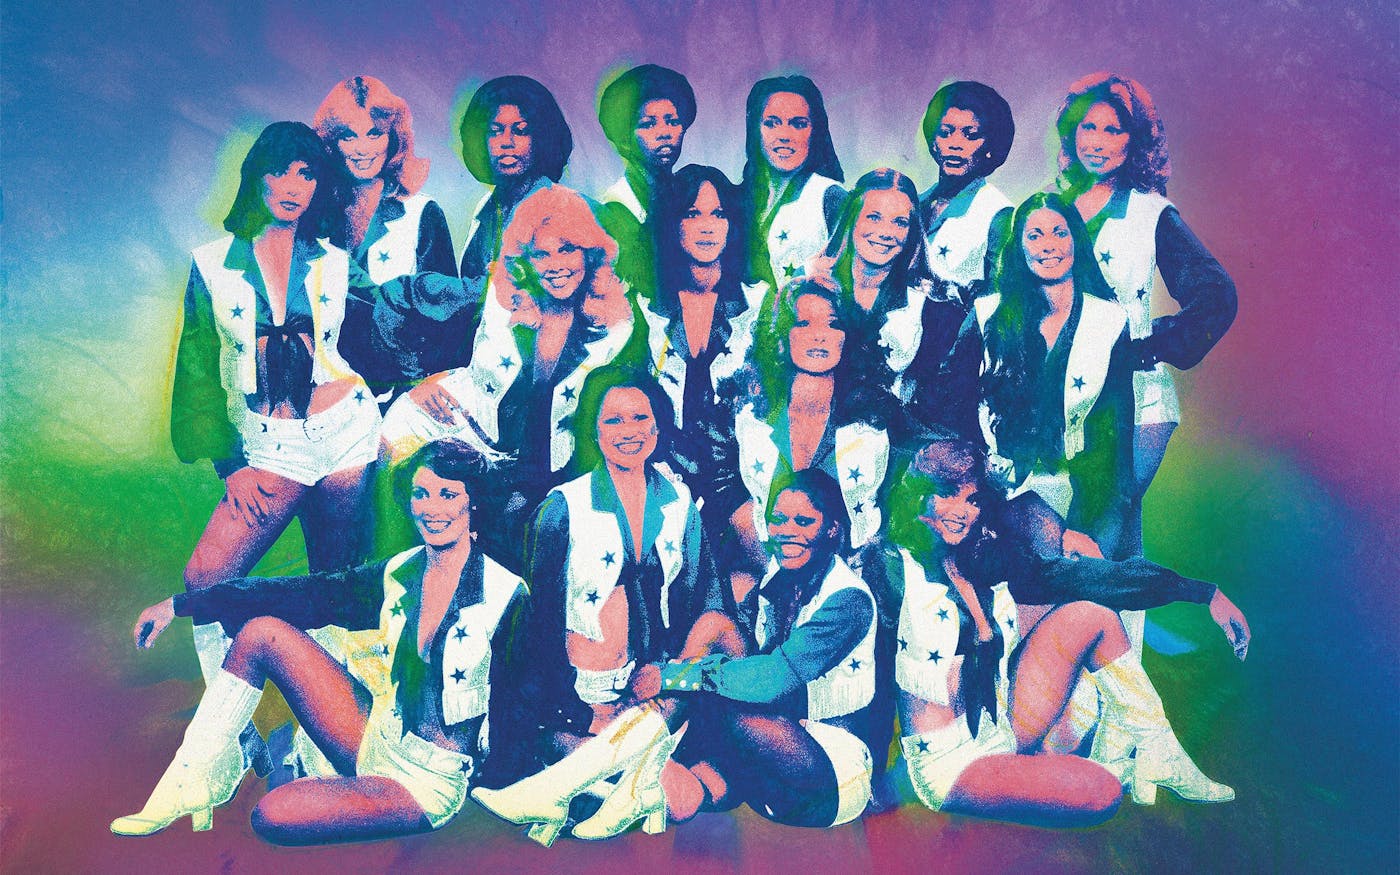 Teen Girl Drilled - Sex, Scandal, and Sisterhood: Fifty Years of the Dallas Cowboys Cheerleaders